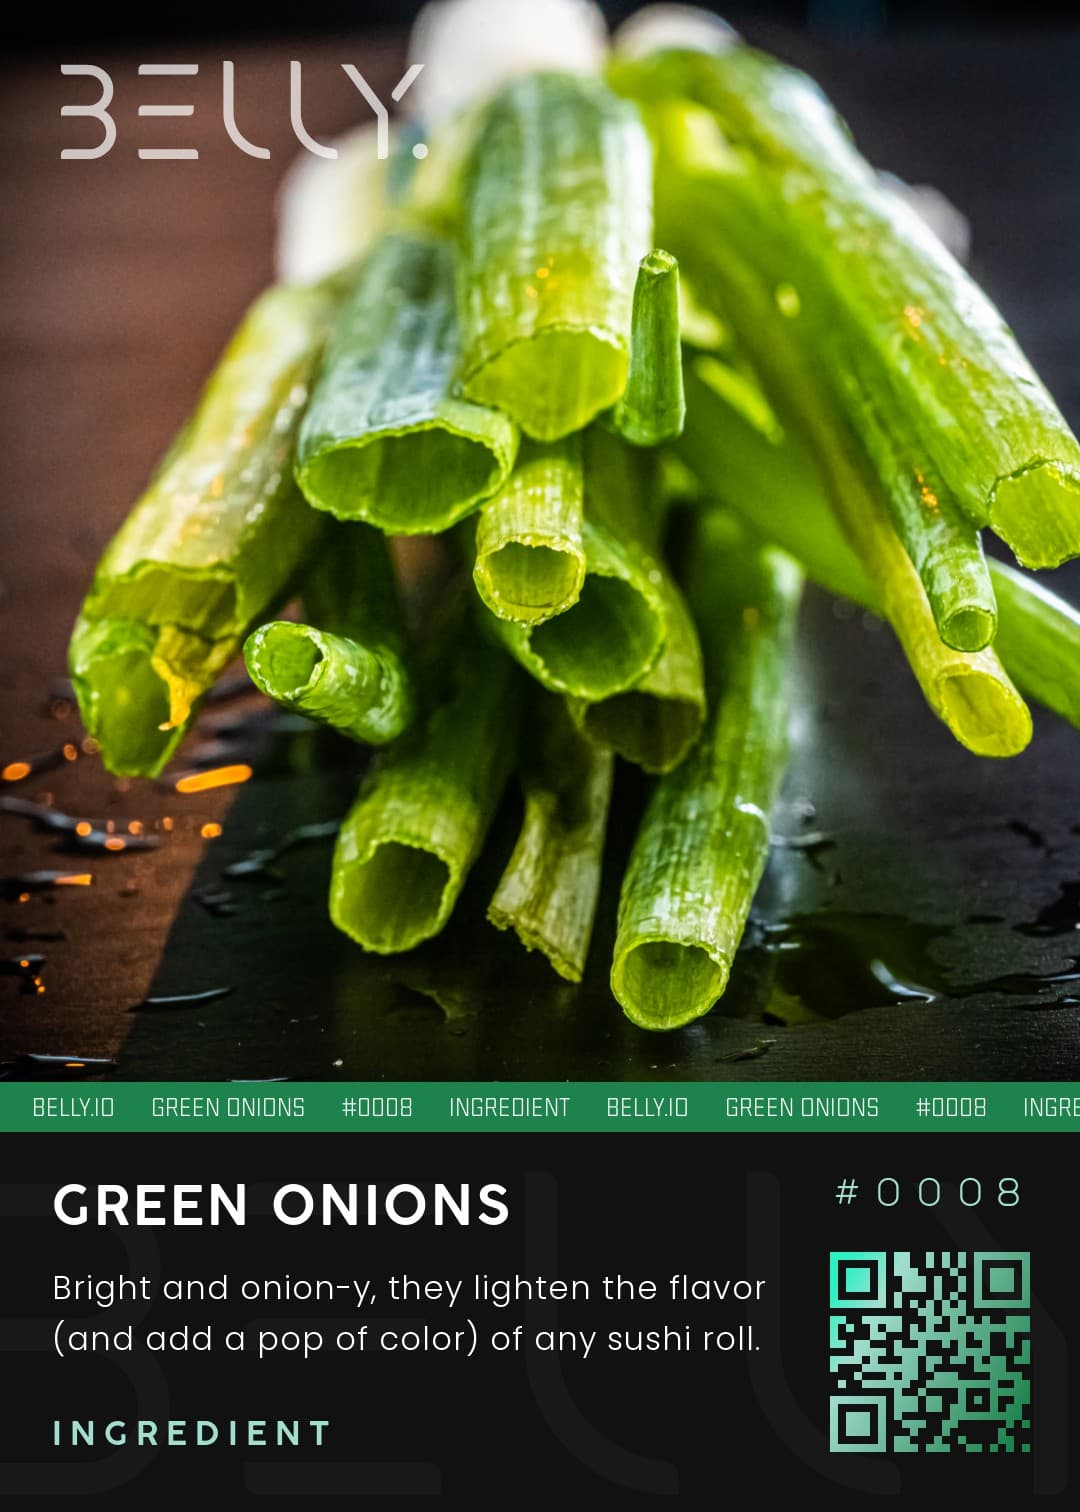 Green Onions - Bright and onion-y, they lighten the flavor (and add a pop of color) of any sushi roll.